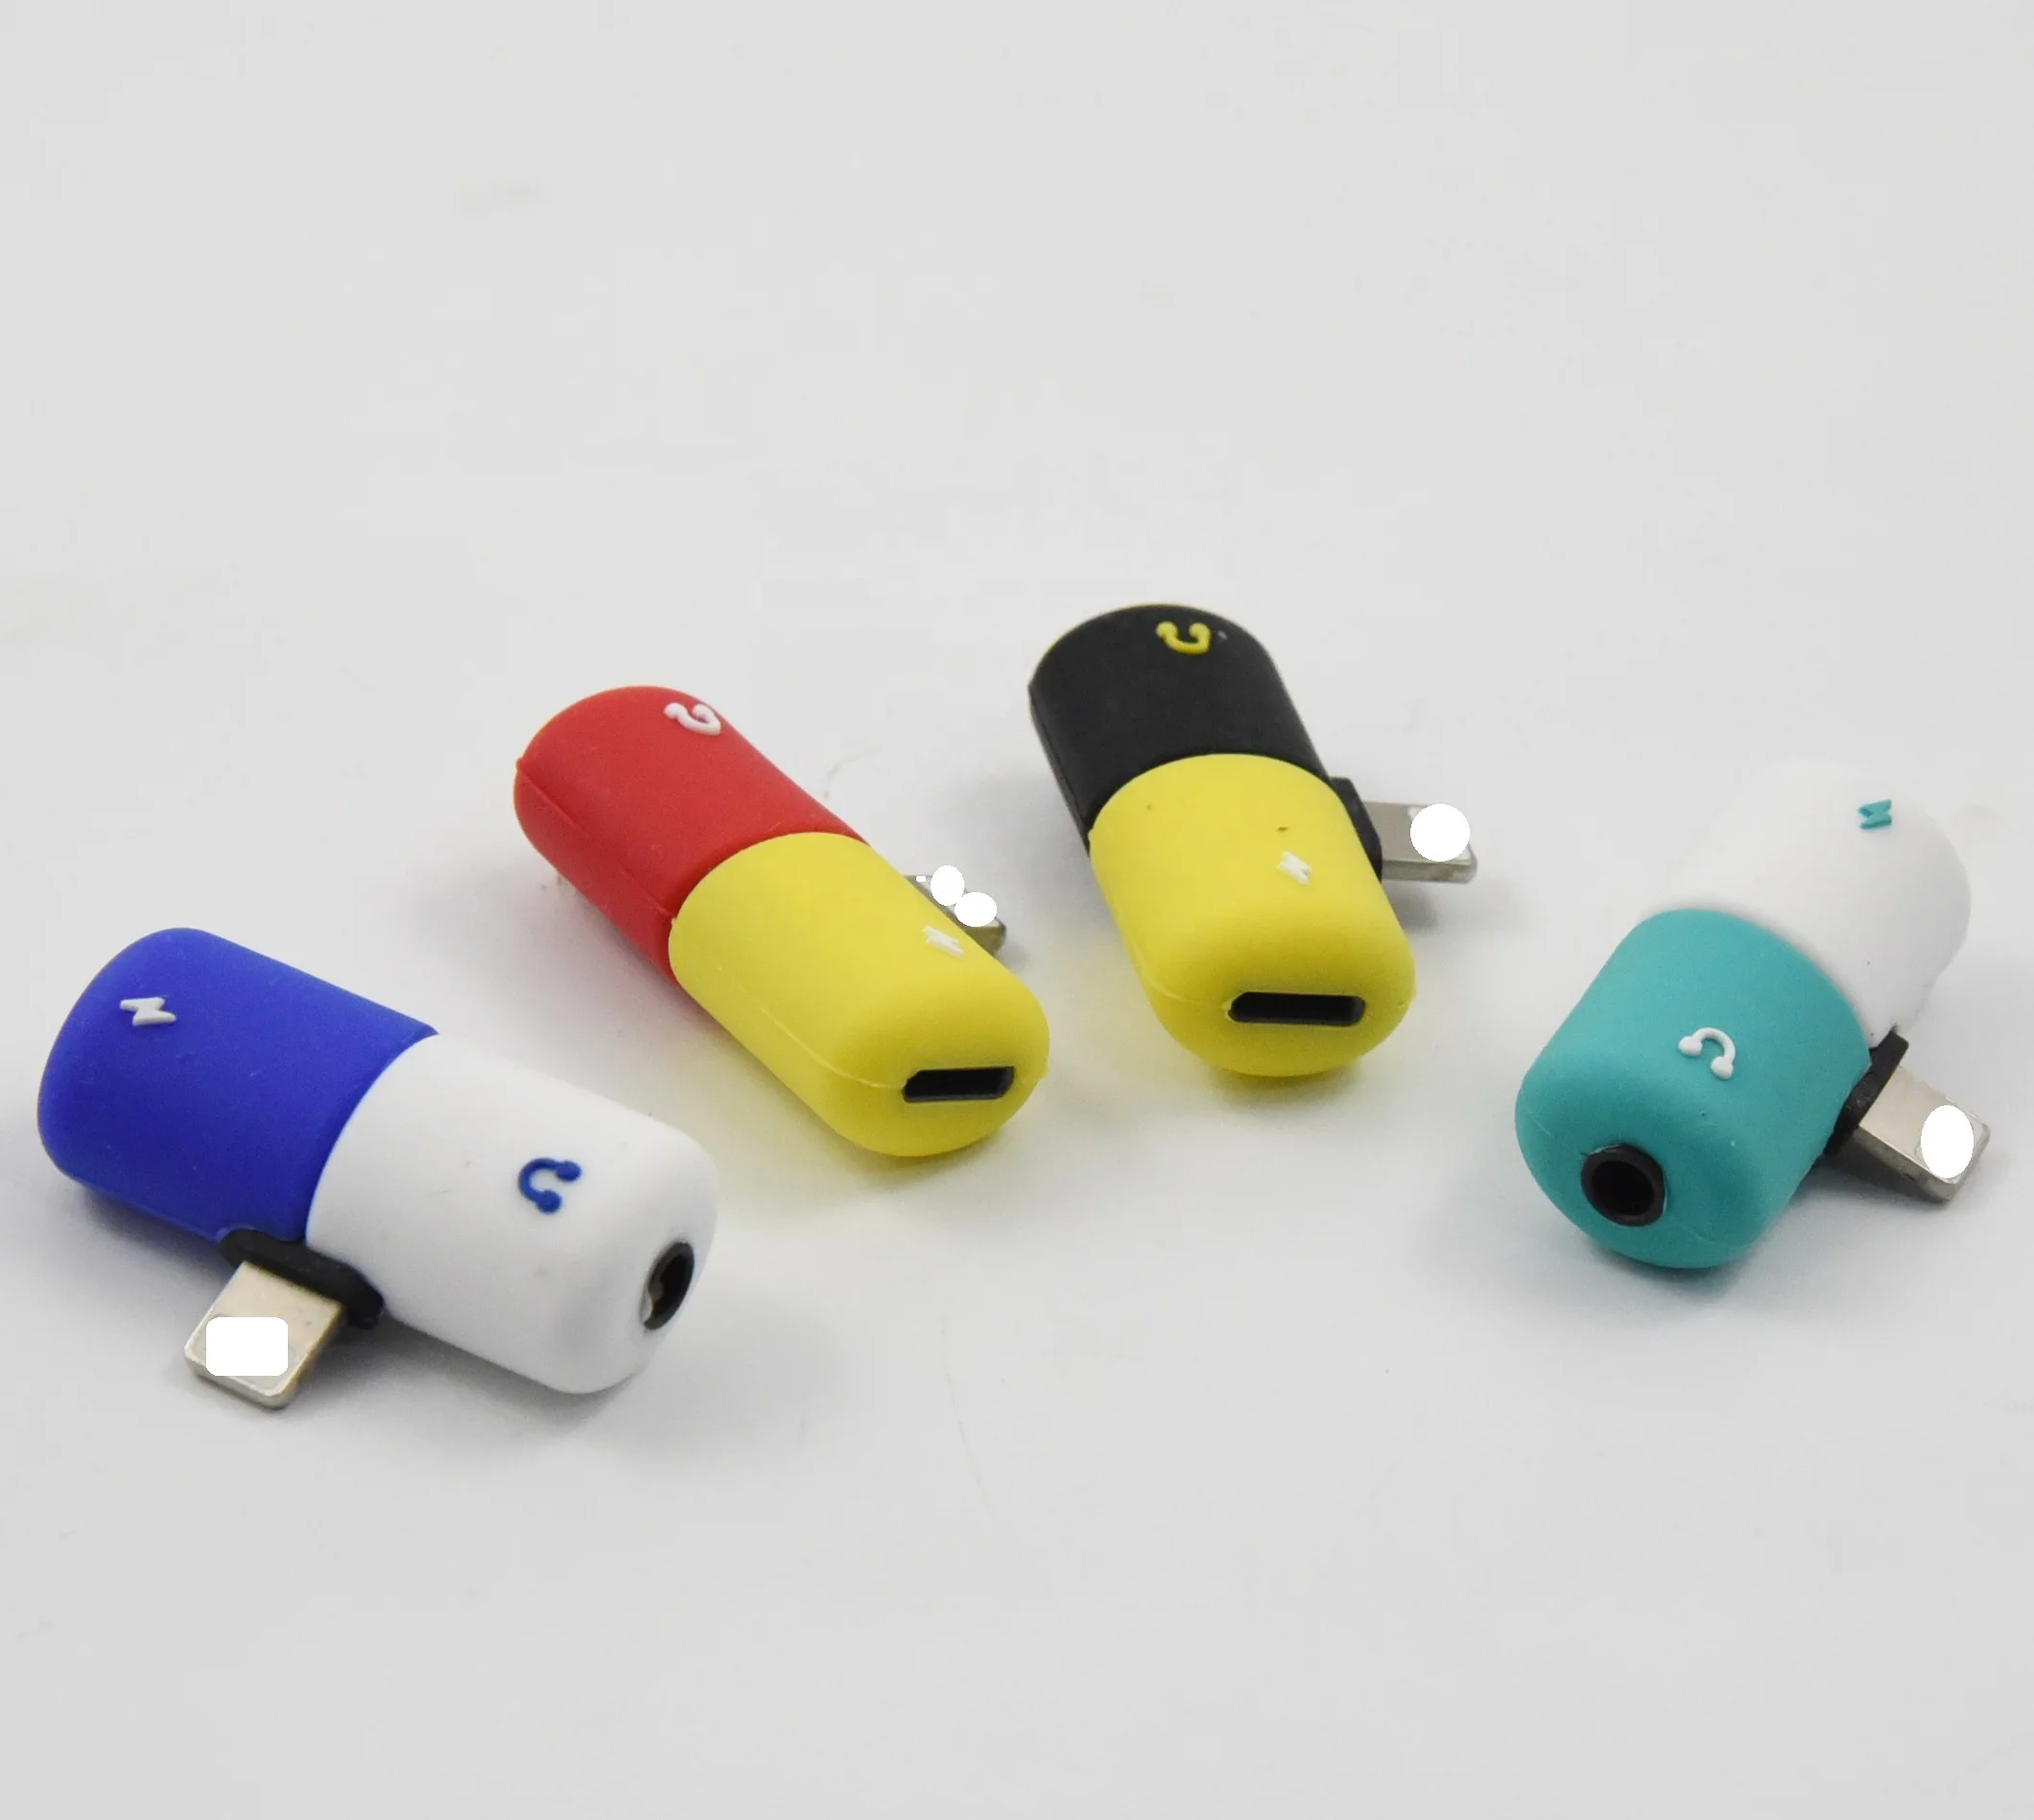 

ADAPTER 2 in1 Mini Pill Shape Charging Splitter Headphone Audio Adapter for IPhone earphone Jack AUX Connector Adapter, Blue+white/black+yellow